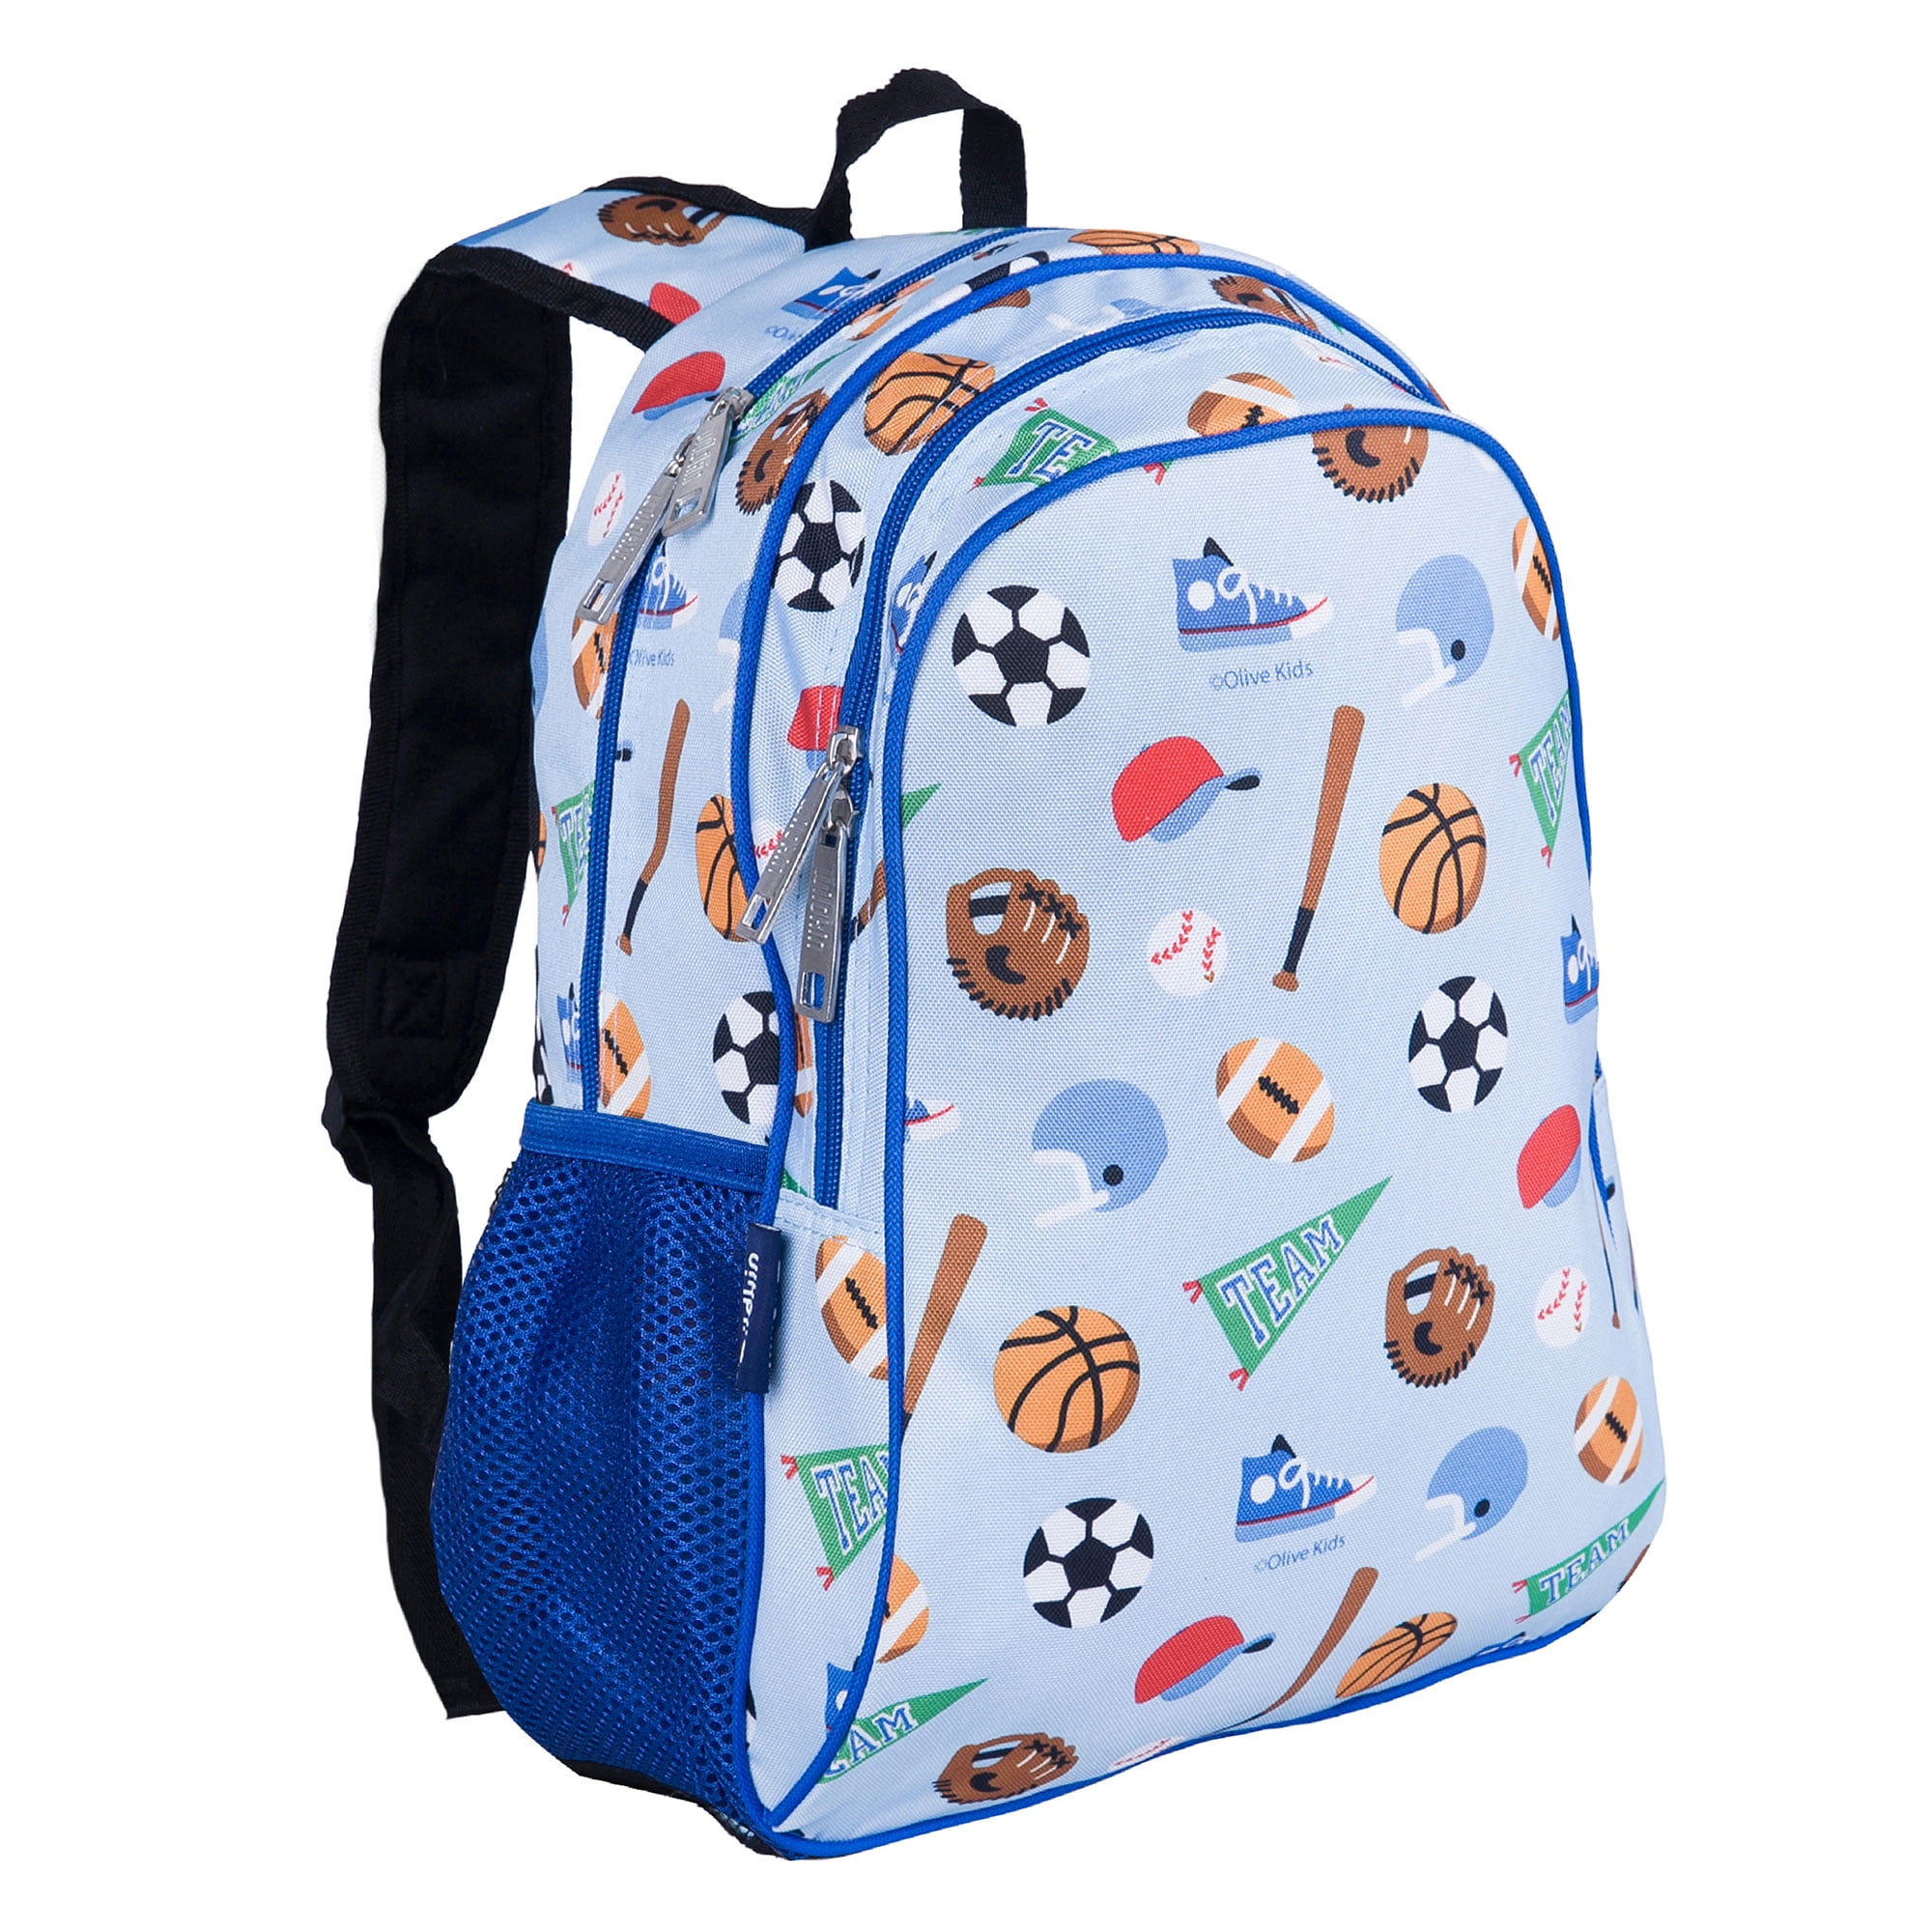 Wildkin Kids 15 Inch School and Travel Backpack for Boys and Girls (Big Fish  Blue) 